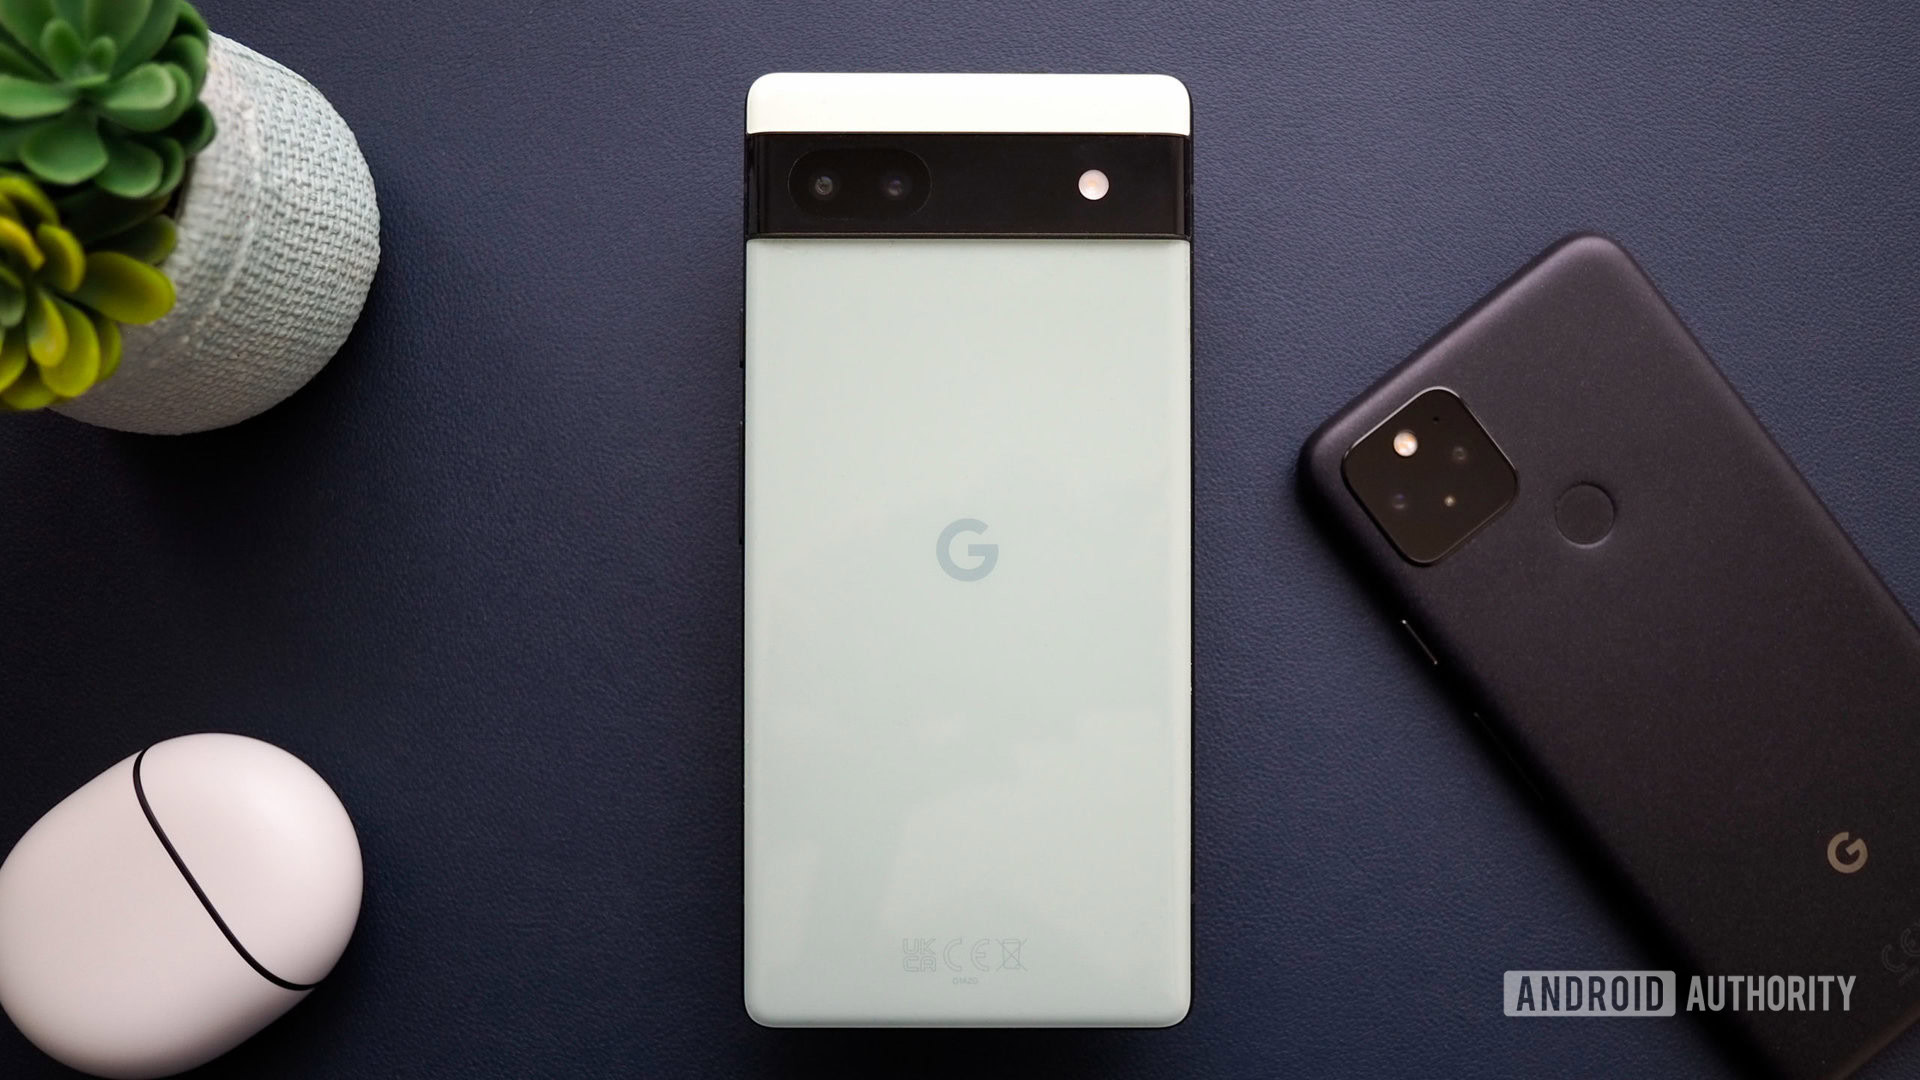 Google Pixel 6a in Sage color, seen from the back, next to a Pixel 5 and Pixel Buds Pro, on a navy background